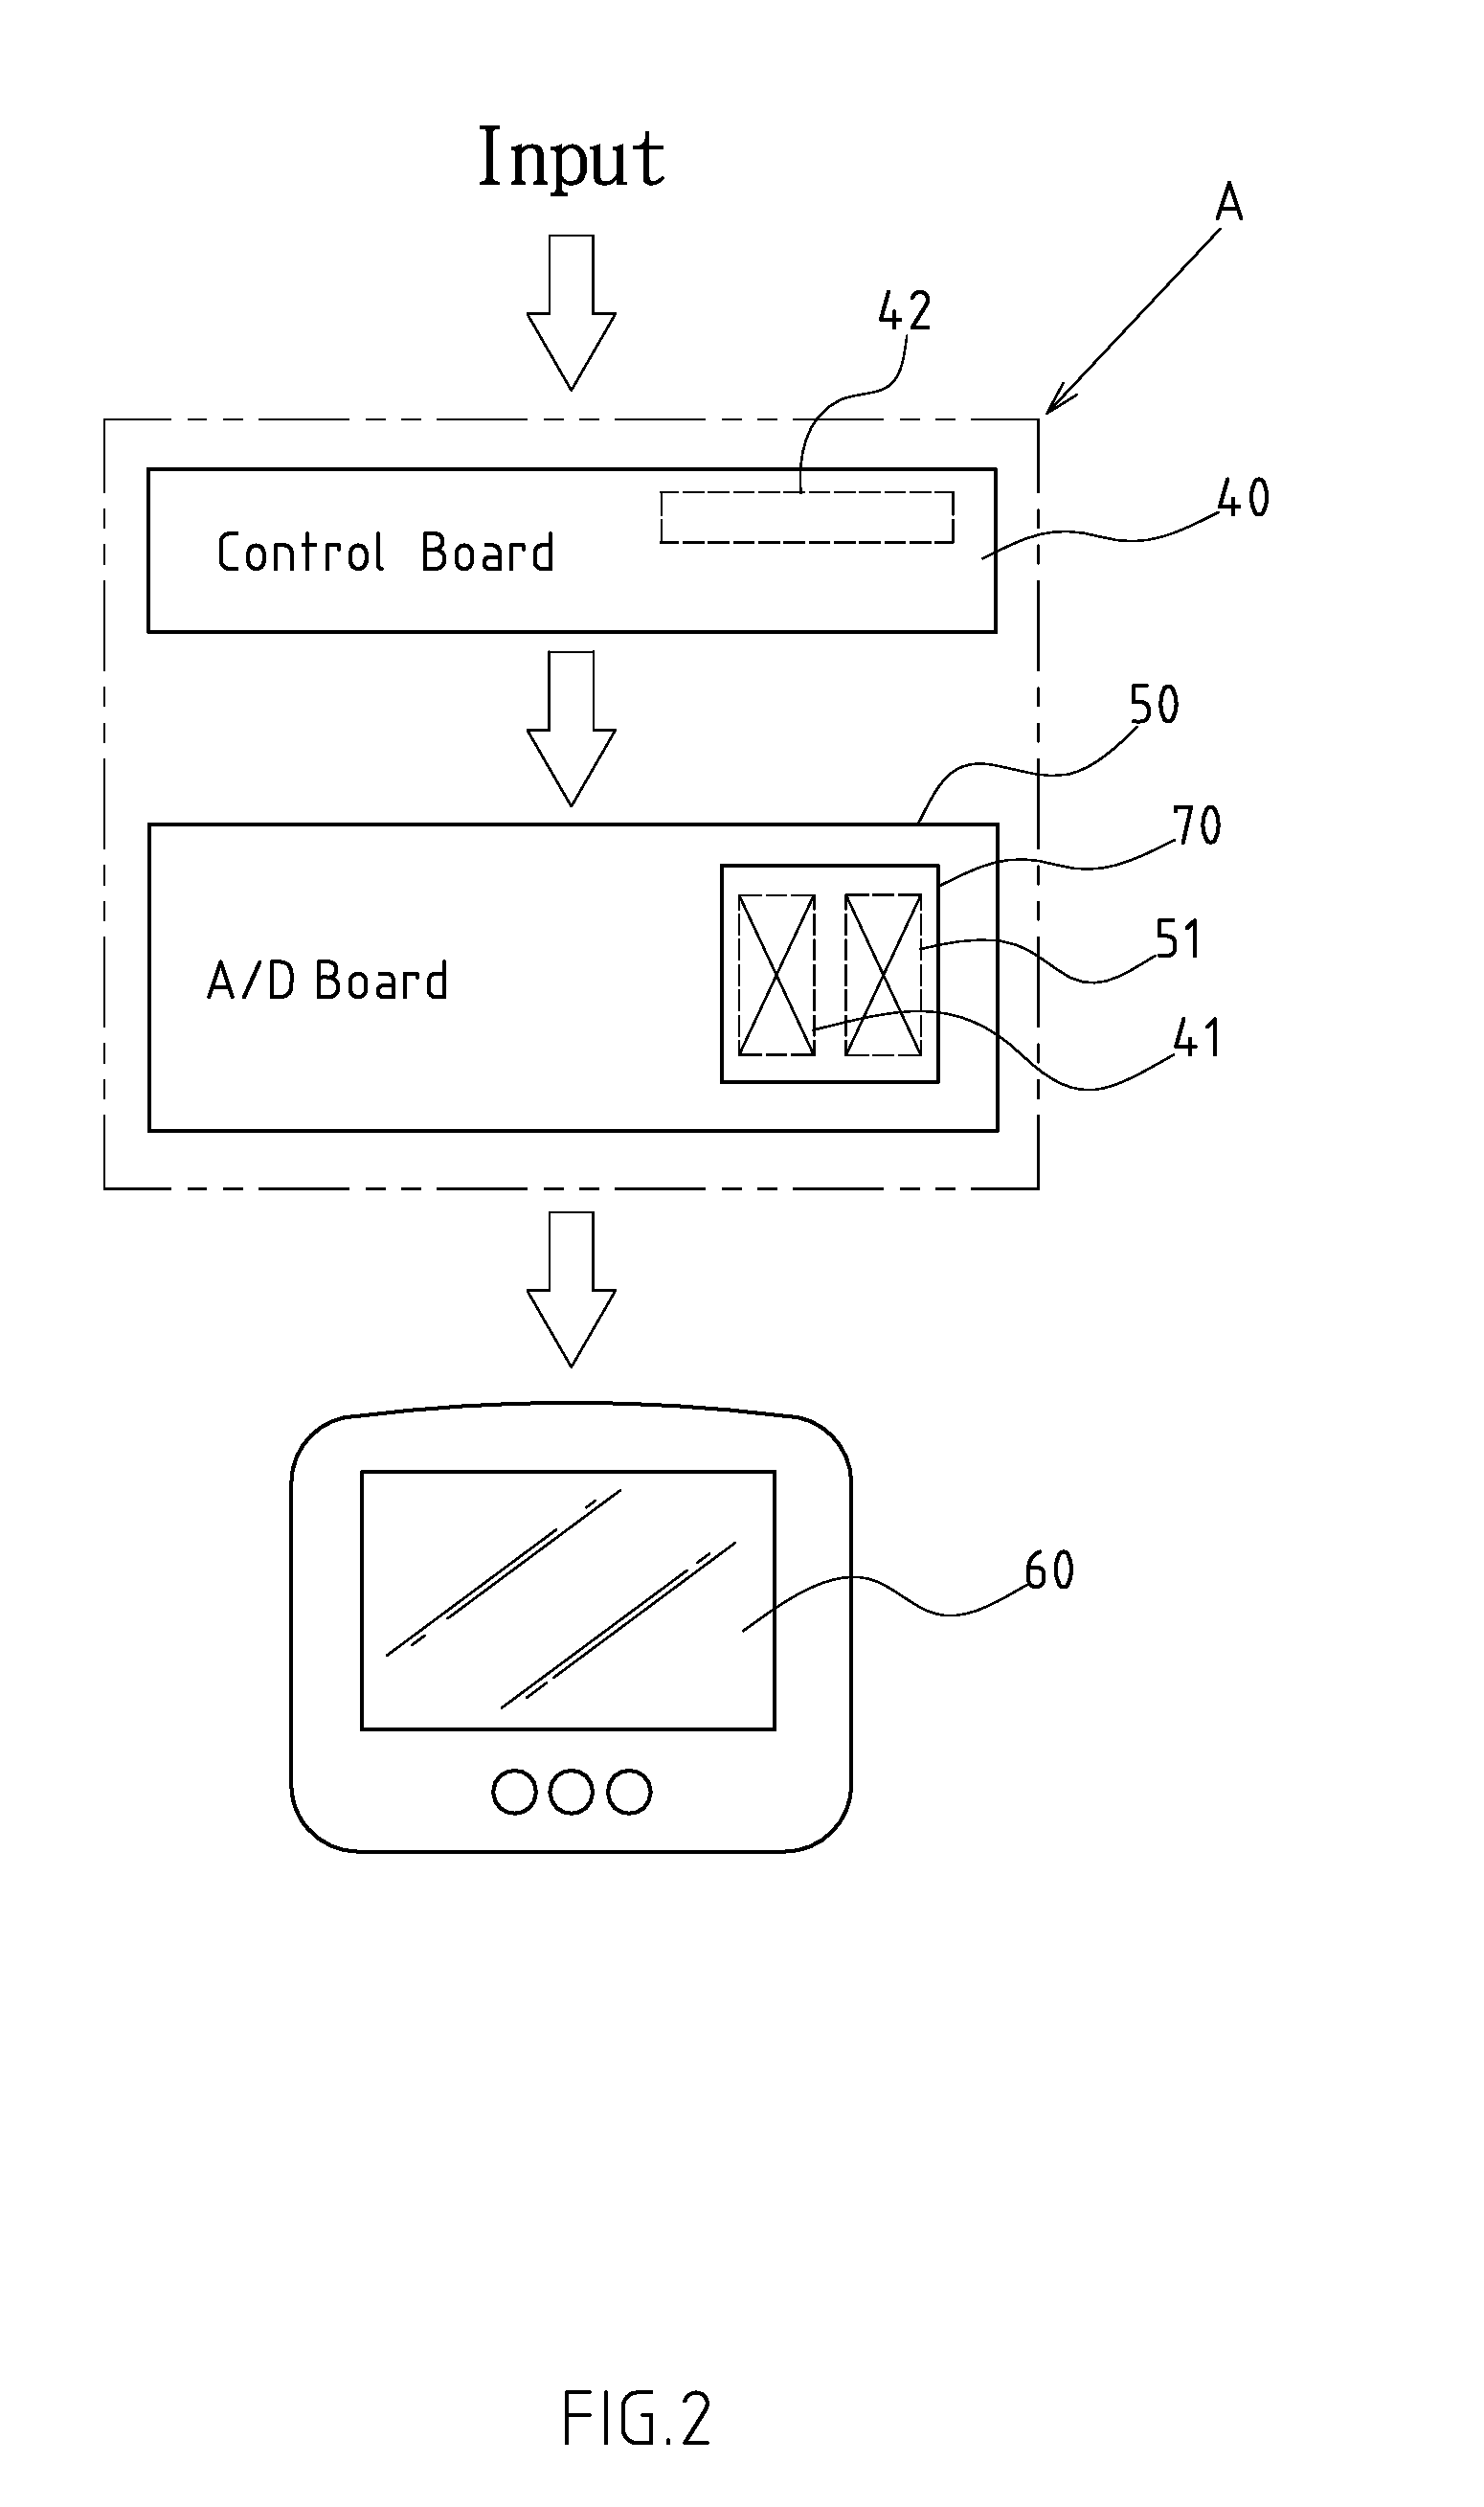 Control panel assembly method for a fitness equipment meter